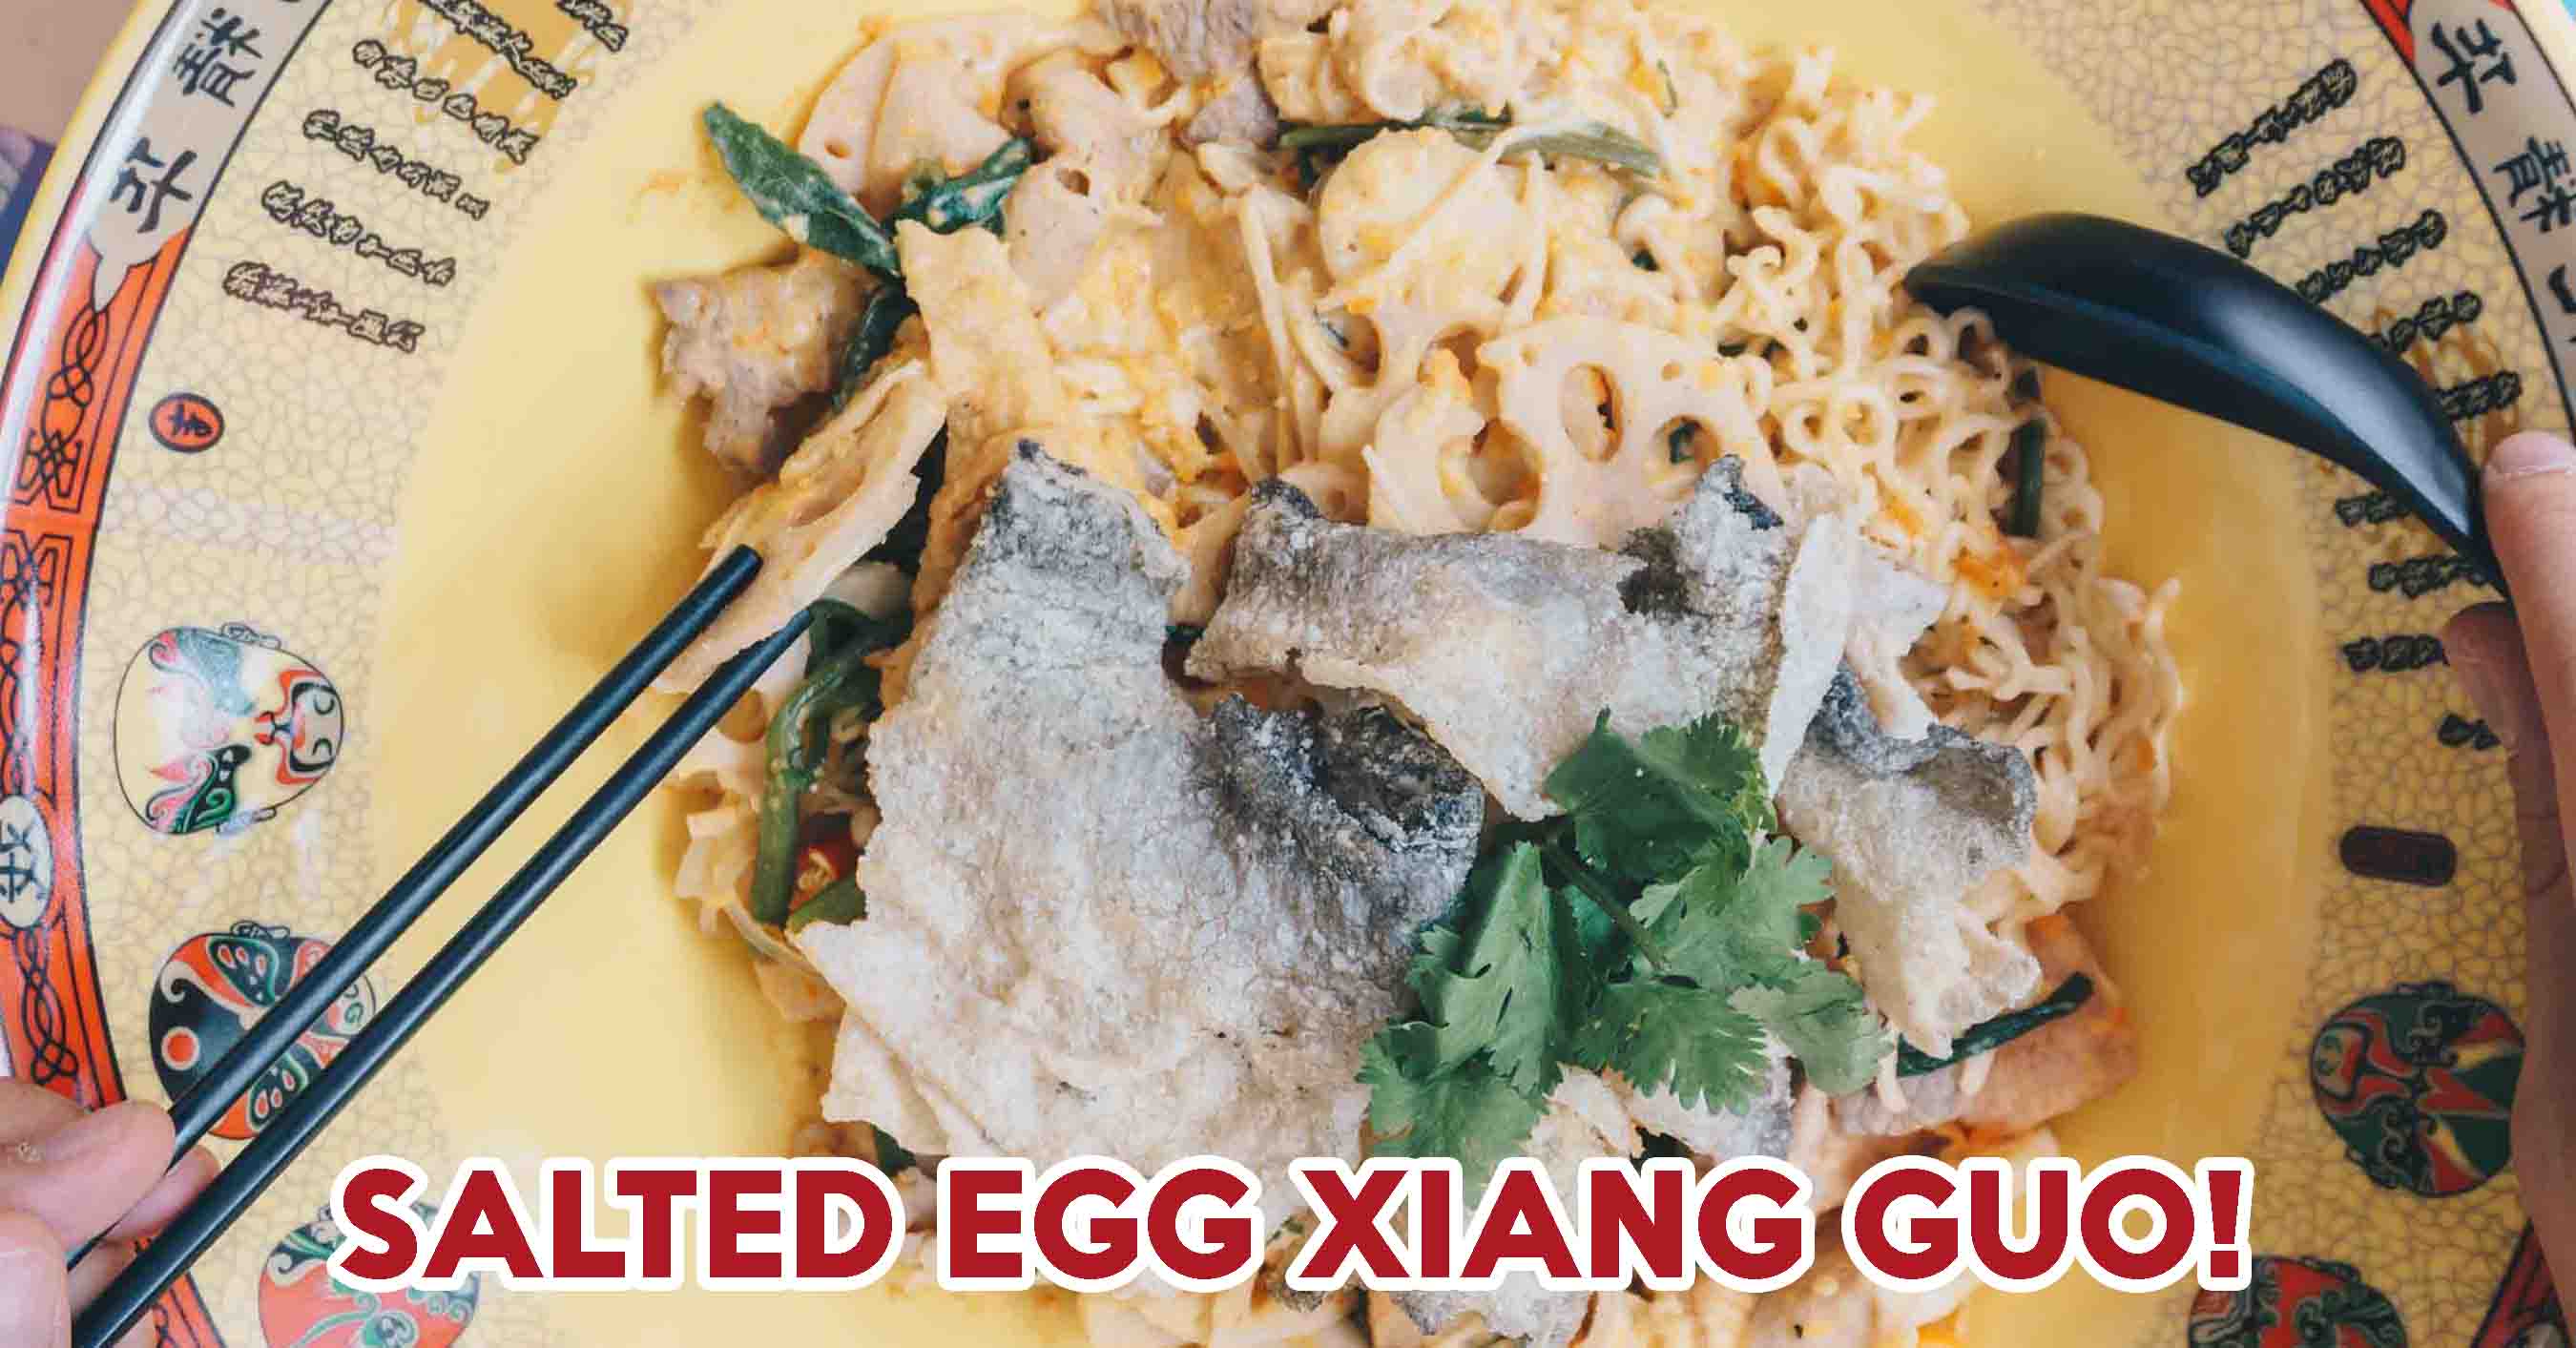 salted egg yolk xiang guo cover